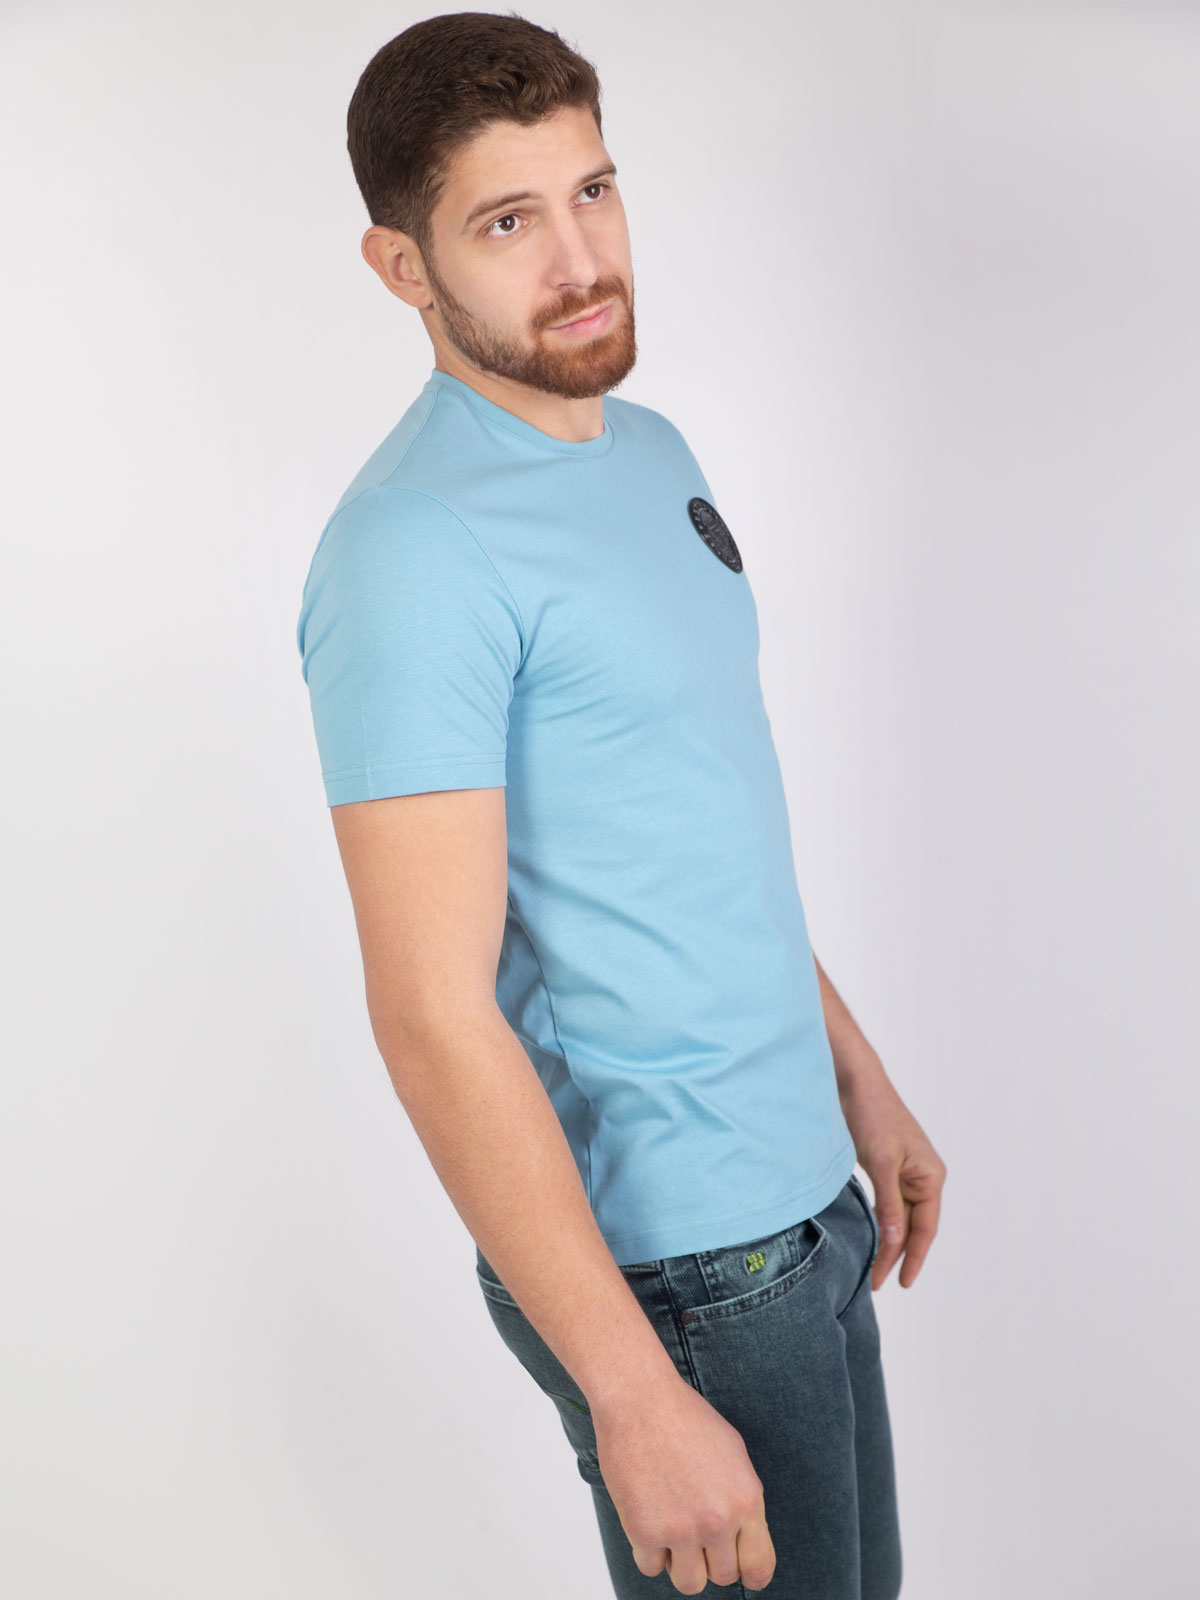 Light blue tshirt with a round patch - 96381 € 11.81 img2